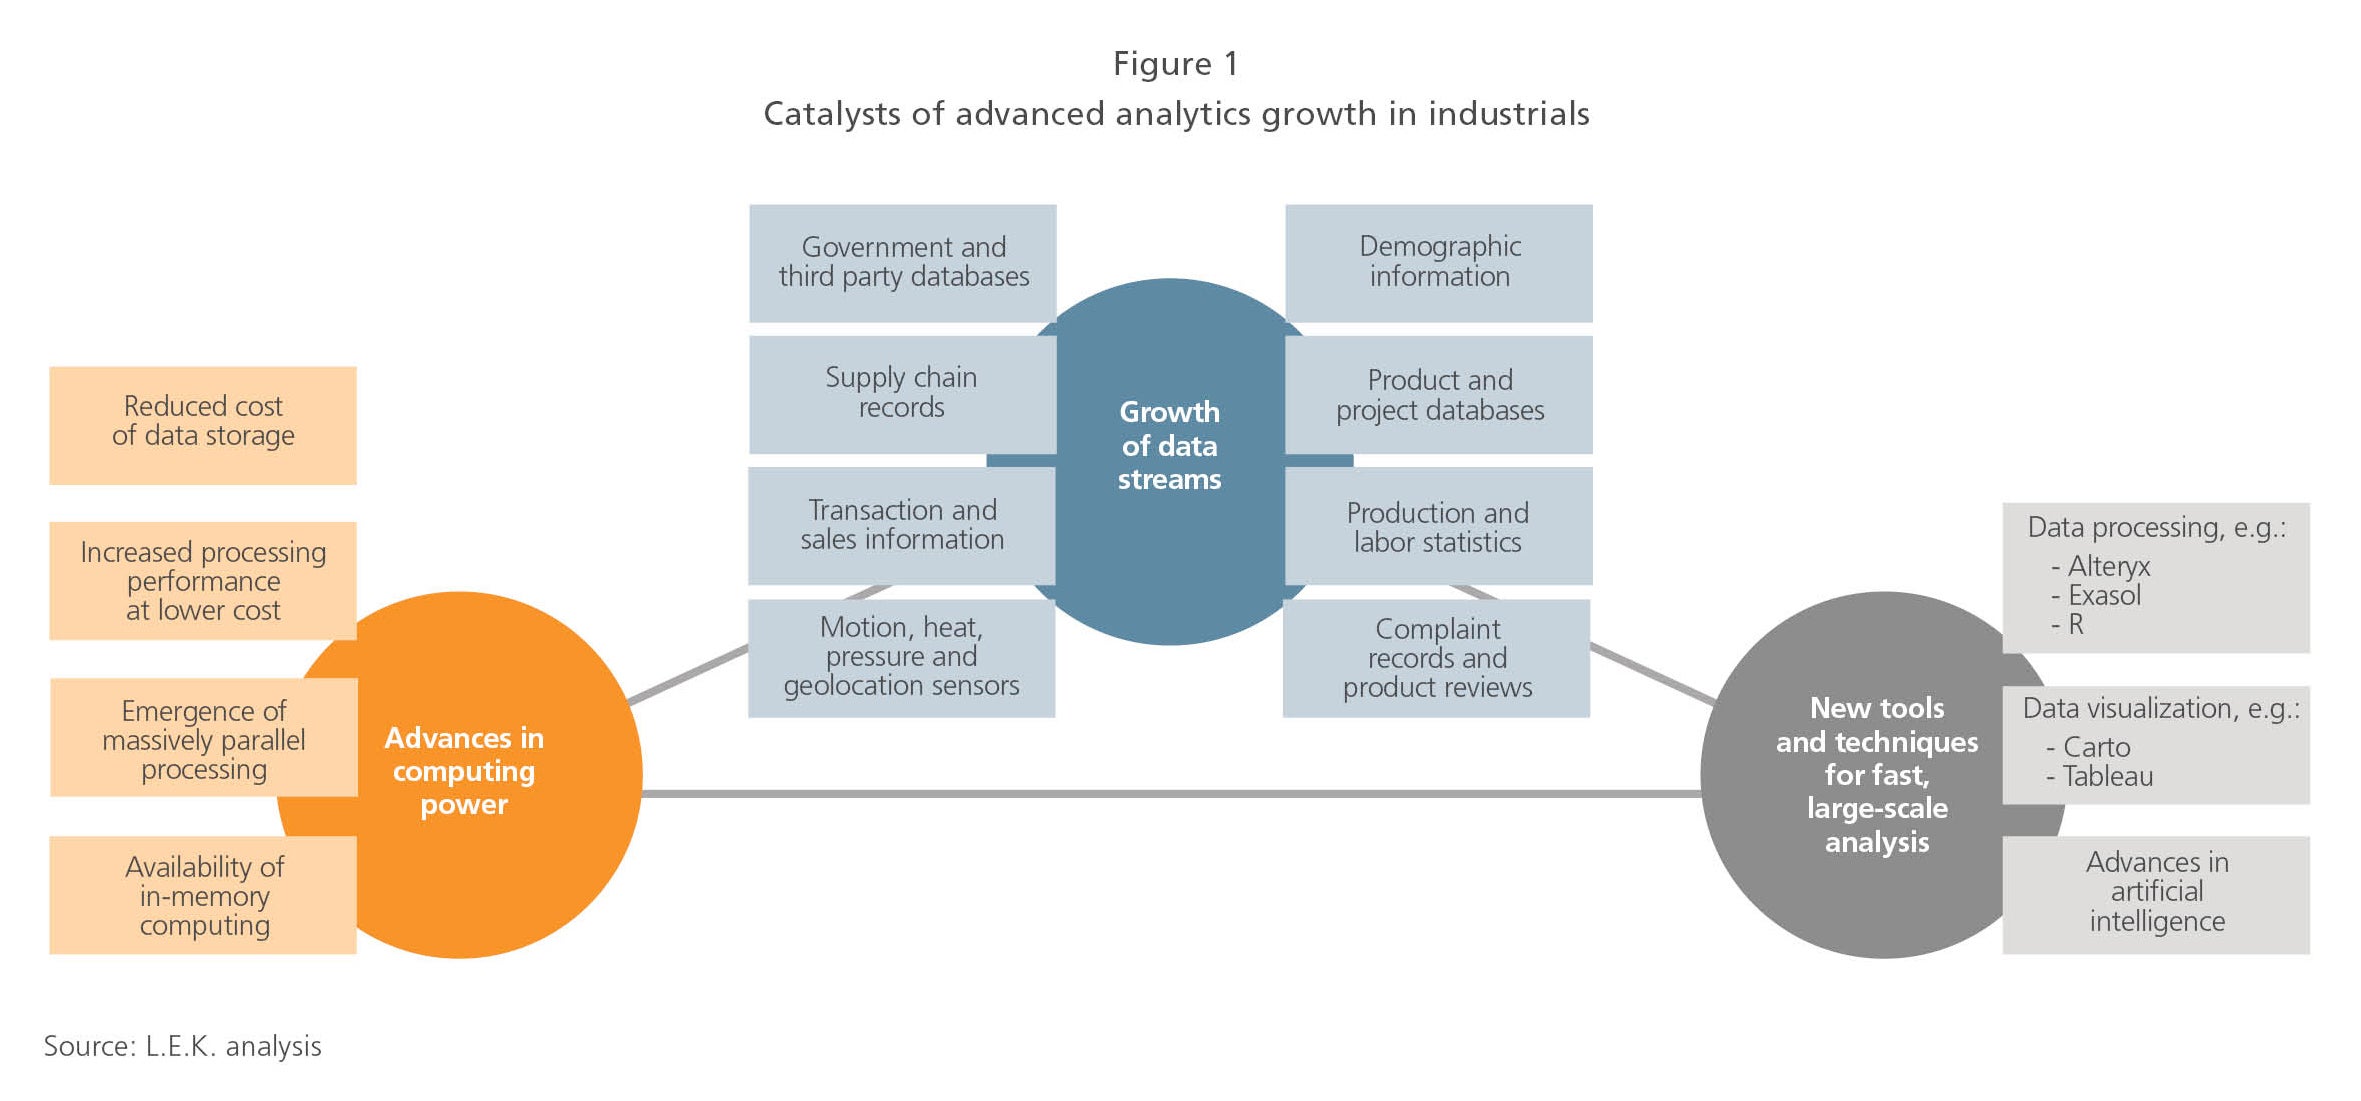 Catalysts of advanced analytics growth in industrials